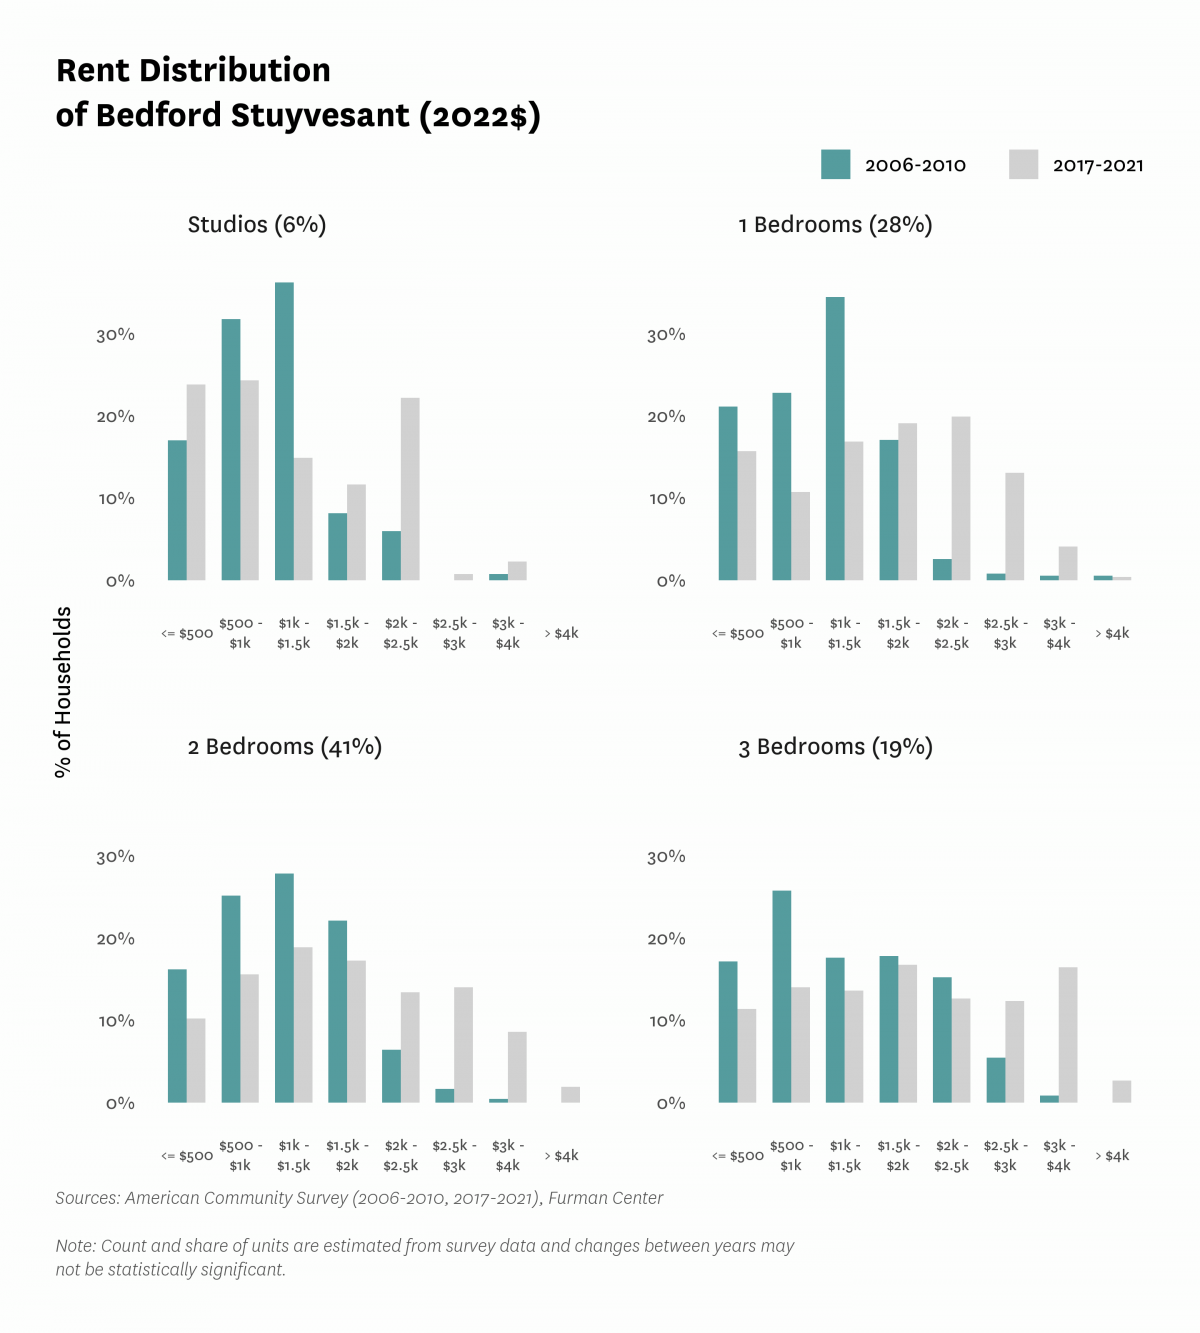 Graph showing the distribution of rents in Bedford Stuyvesant in both 2010 and 2017-2021.